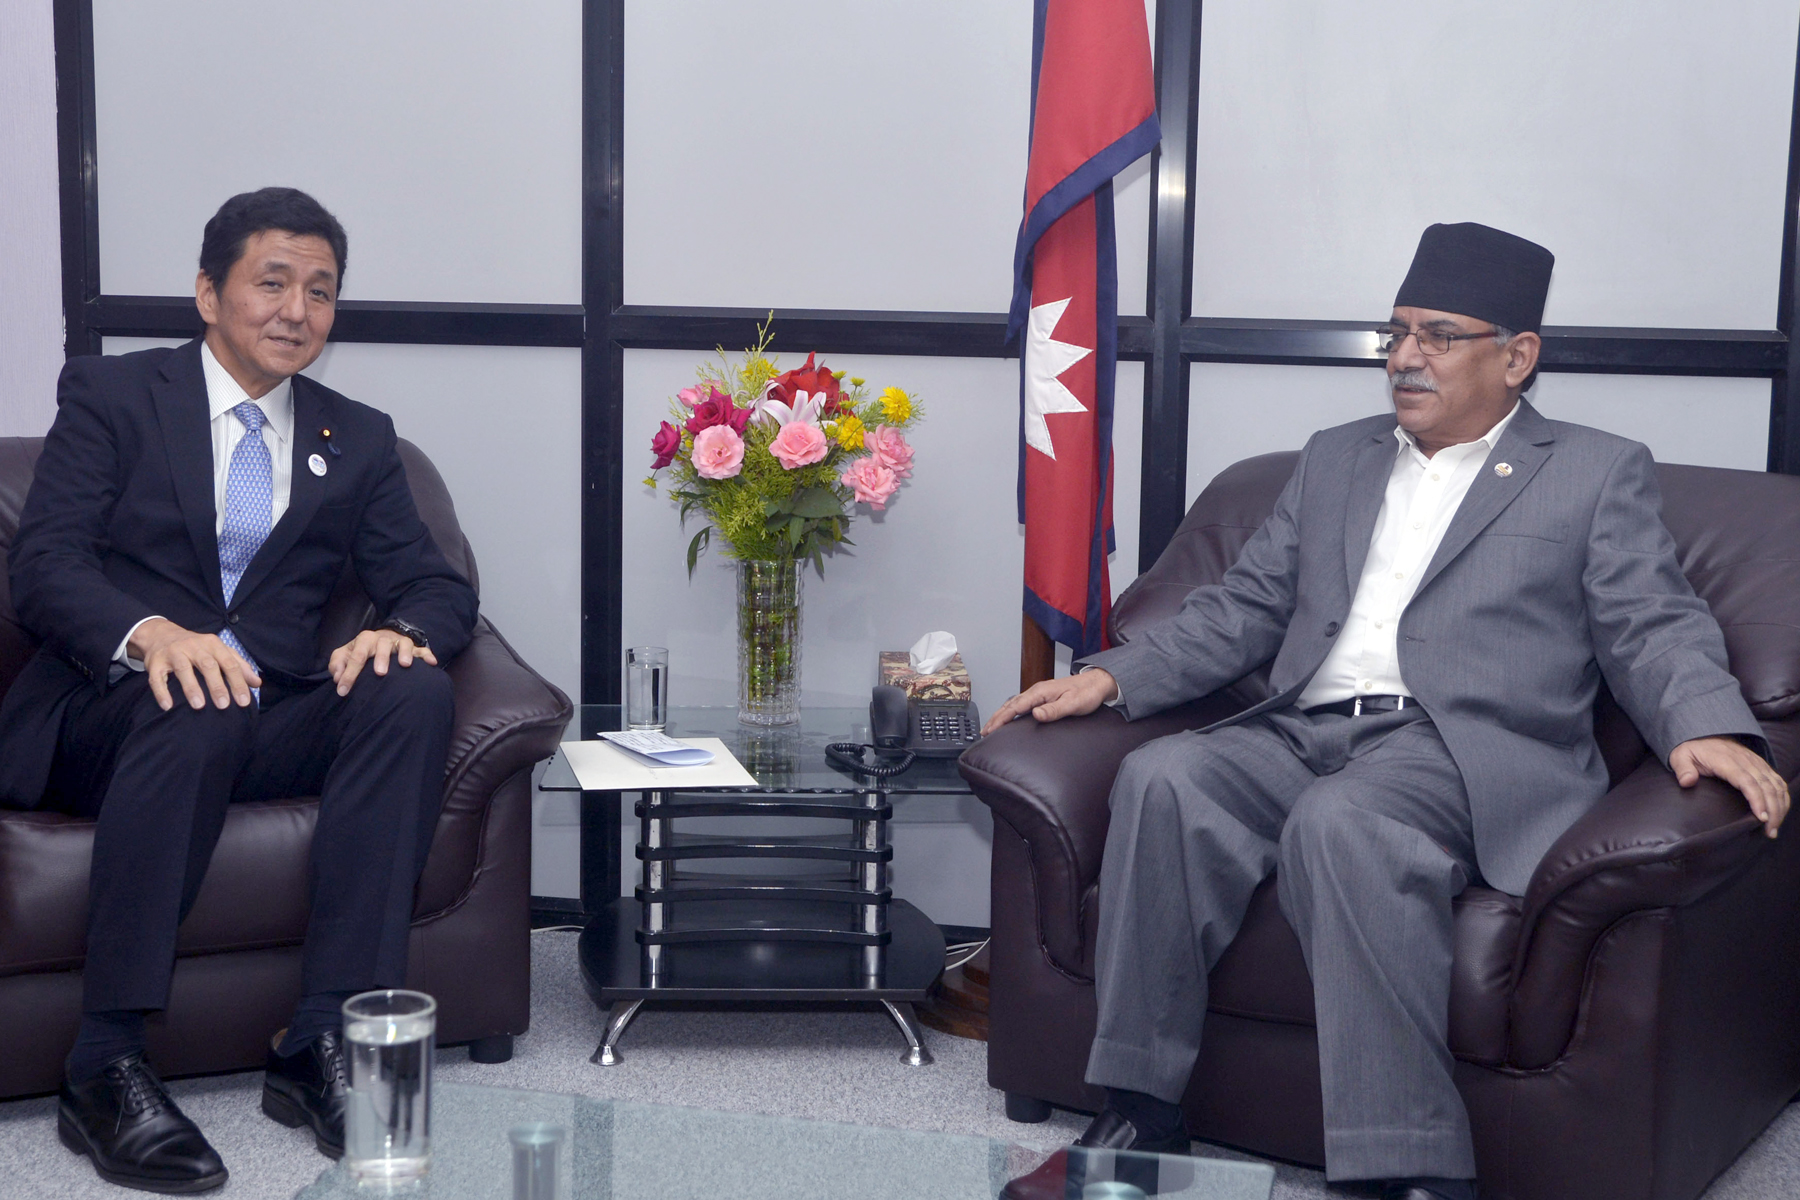 Japanese State Minister Nobuo calls on PM Dahal